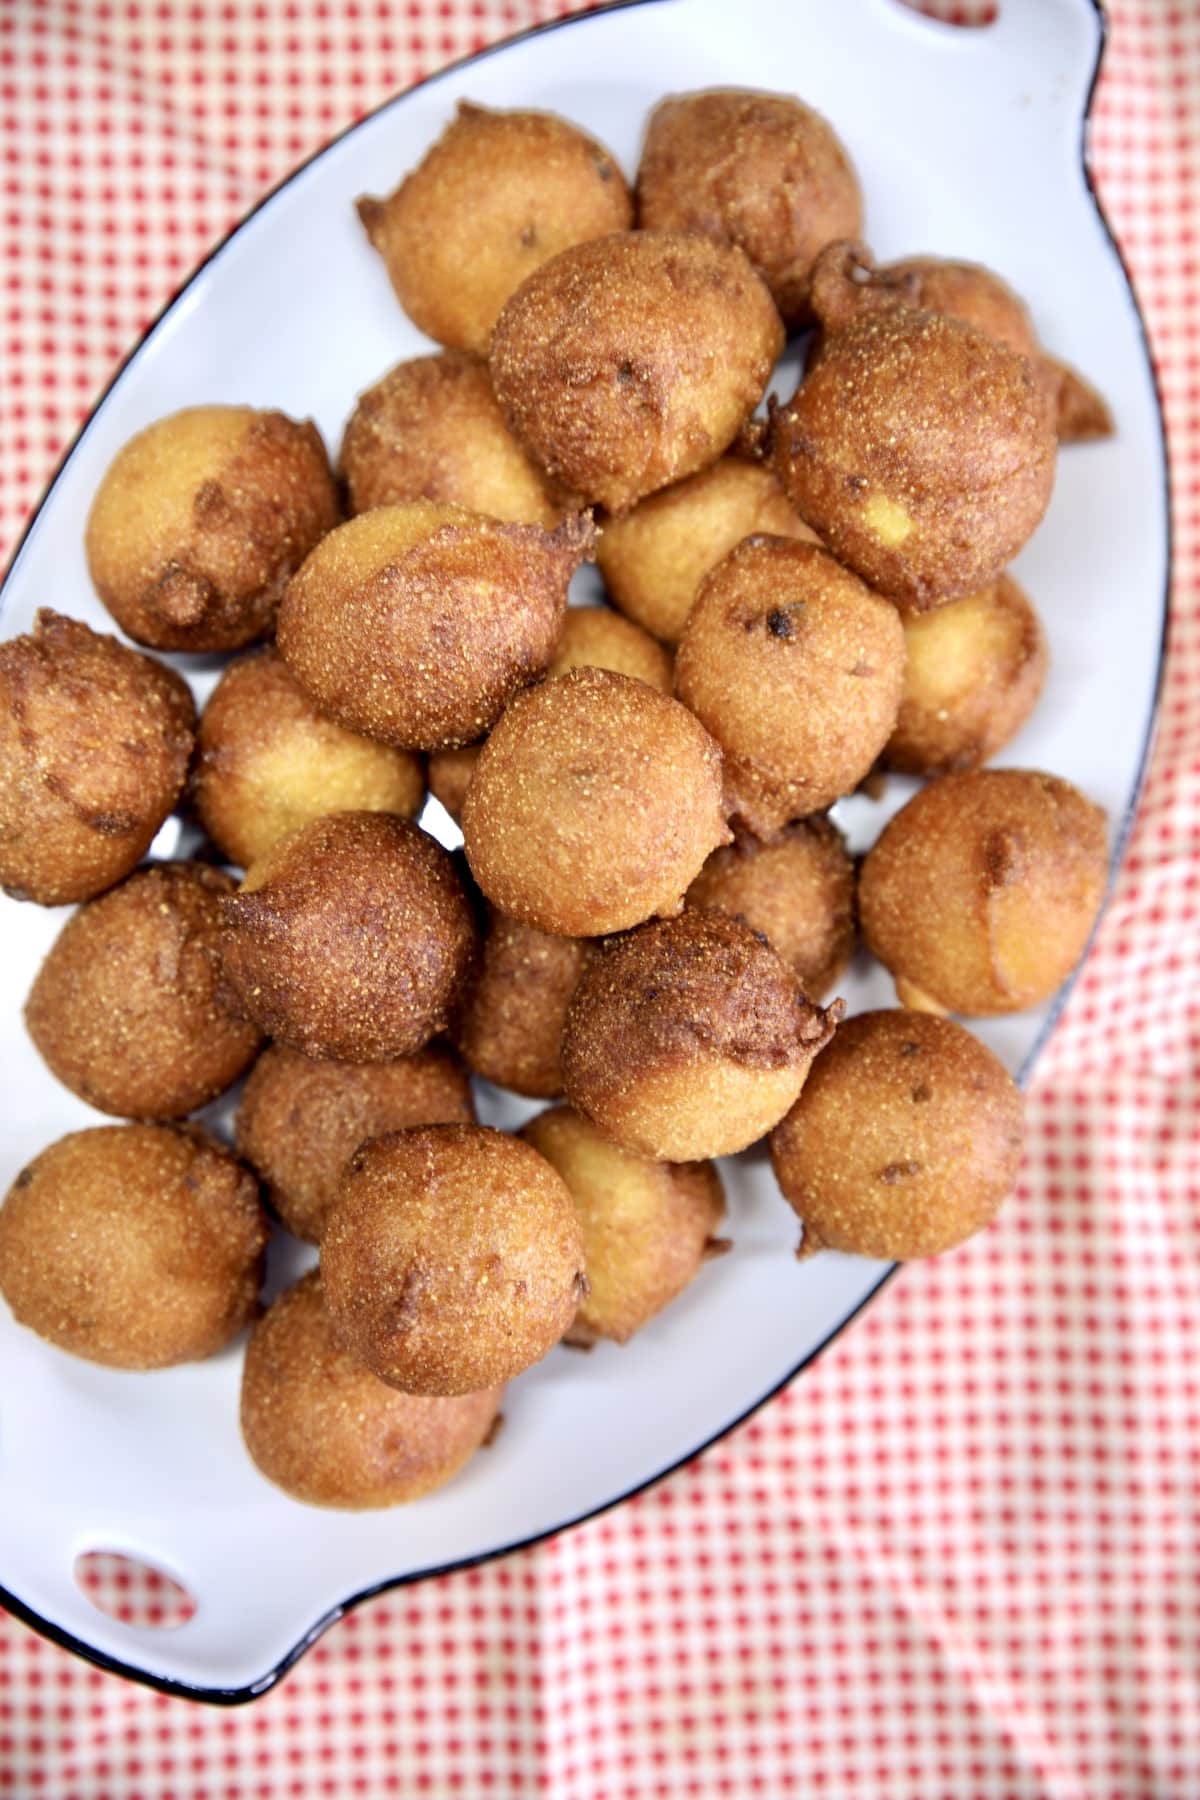 Platter of hush puppies on a red gingham cloth.